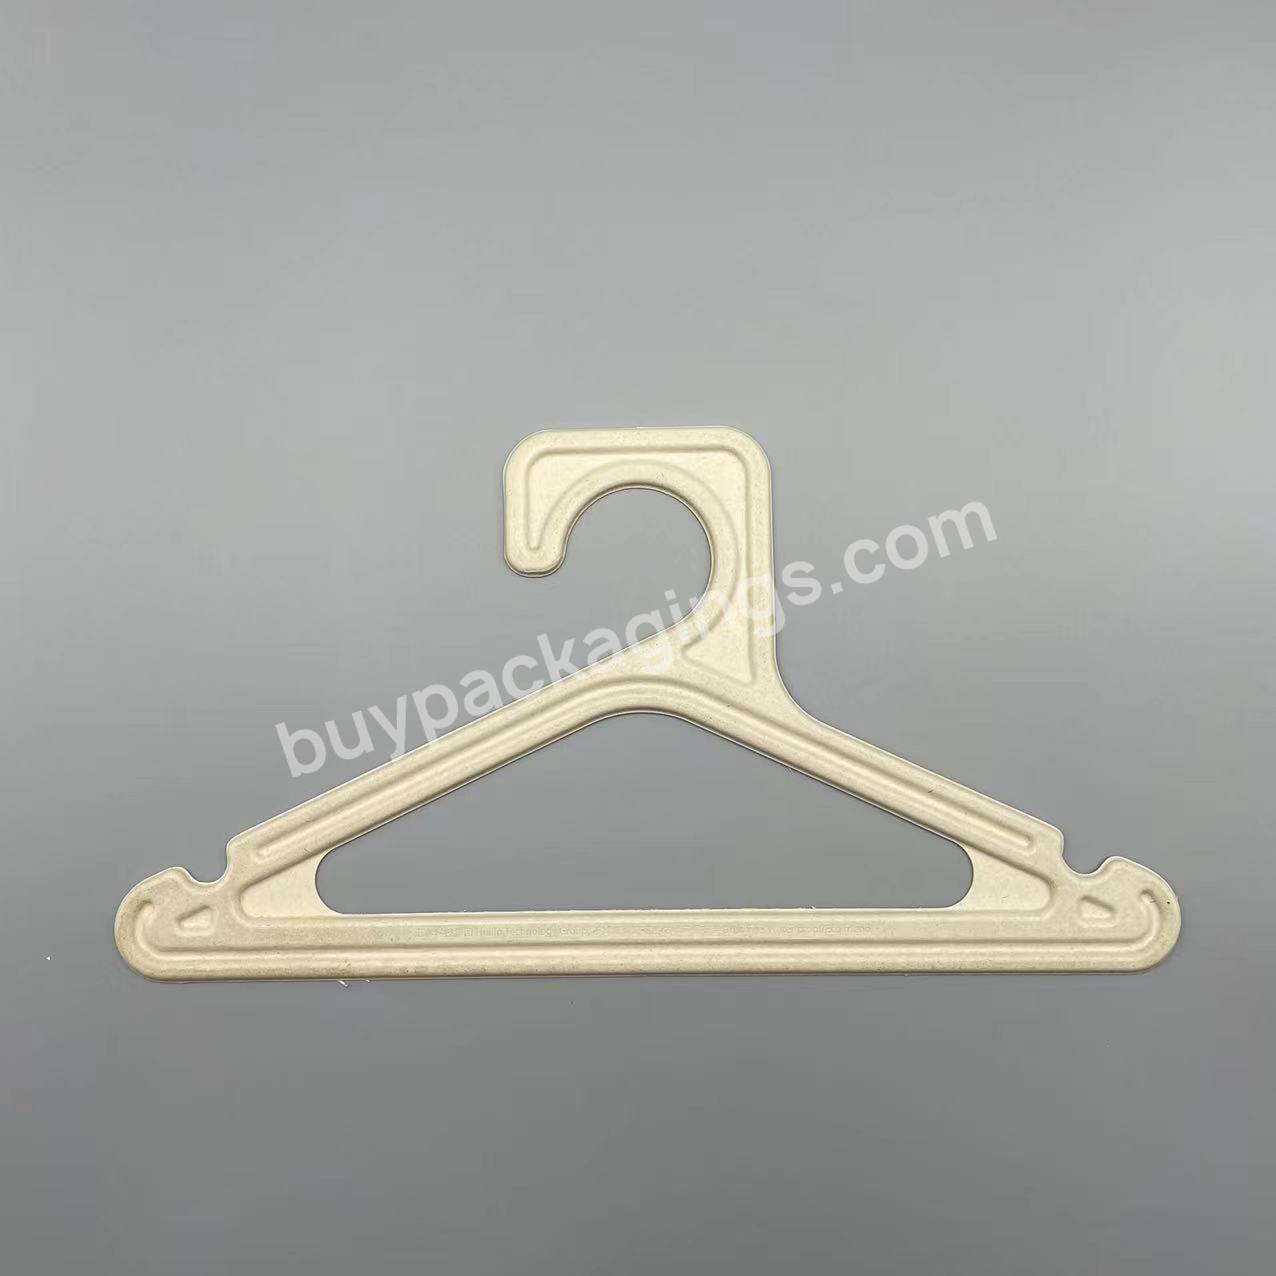 Custom Clothes Logo Printing Biodegradable Molded Paper Pulp Made Clothes Hangers - Buy Molded Pulp Paper Clothes Hangers,Biodegradable Paper Pulp Hangers,Custom Clothes Logo Printing Paper Hanger.